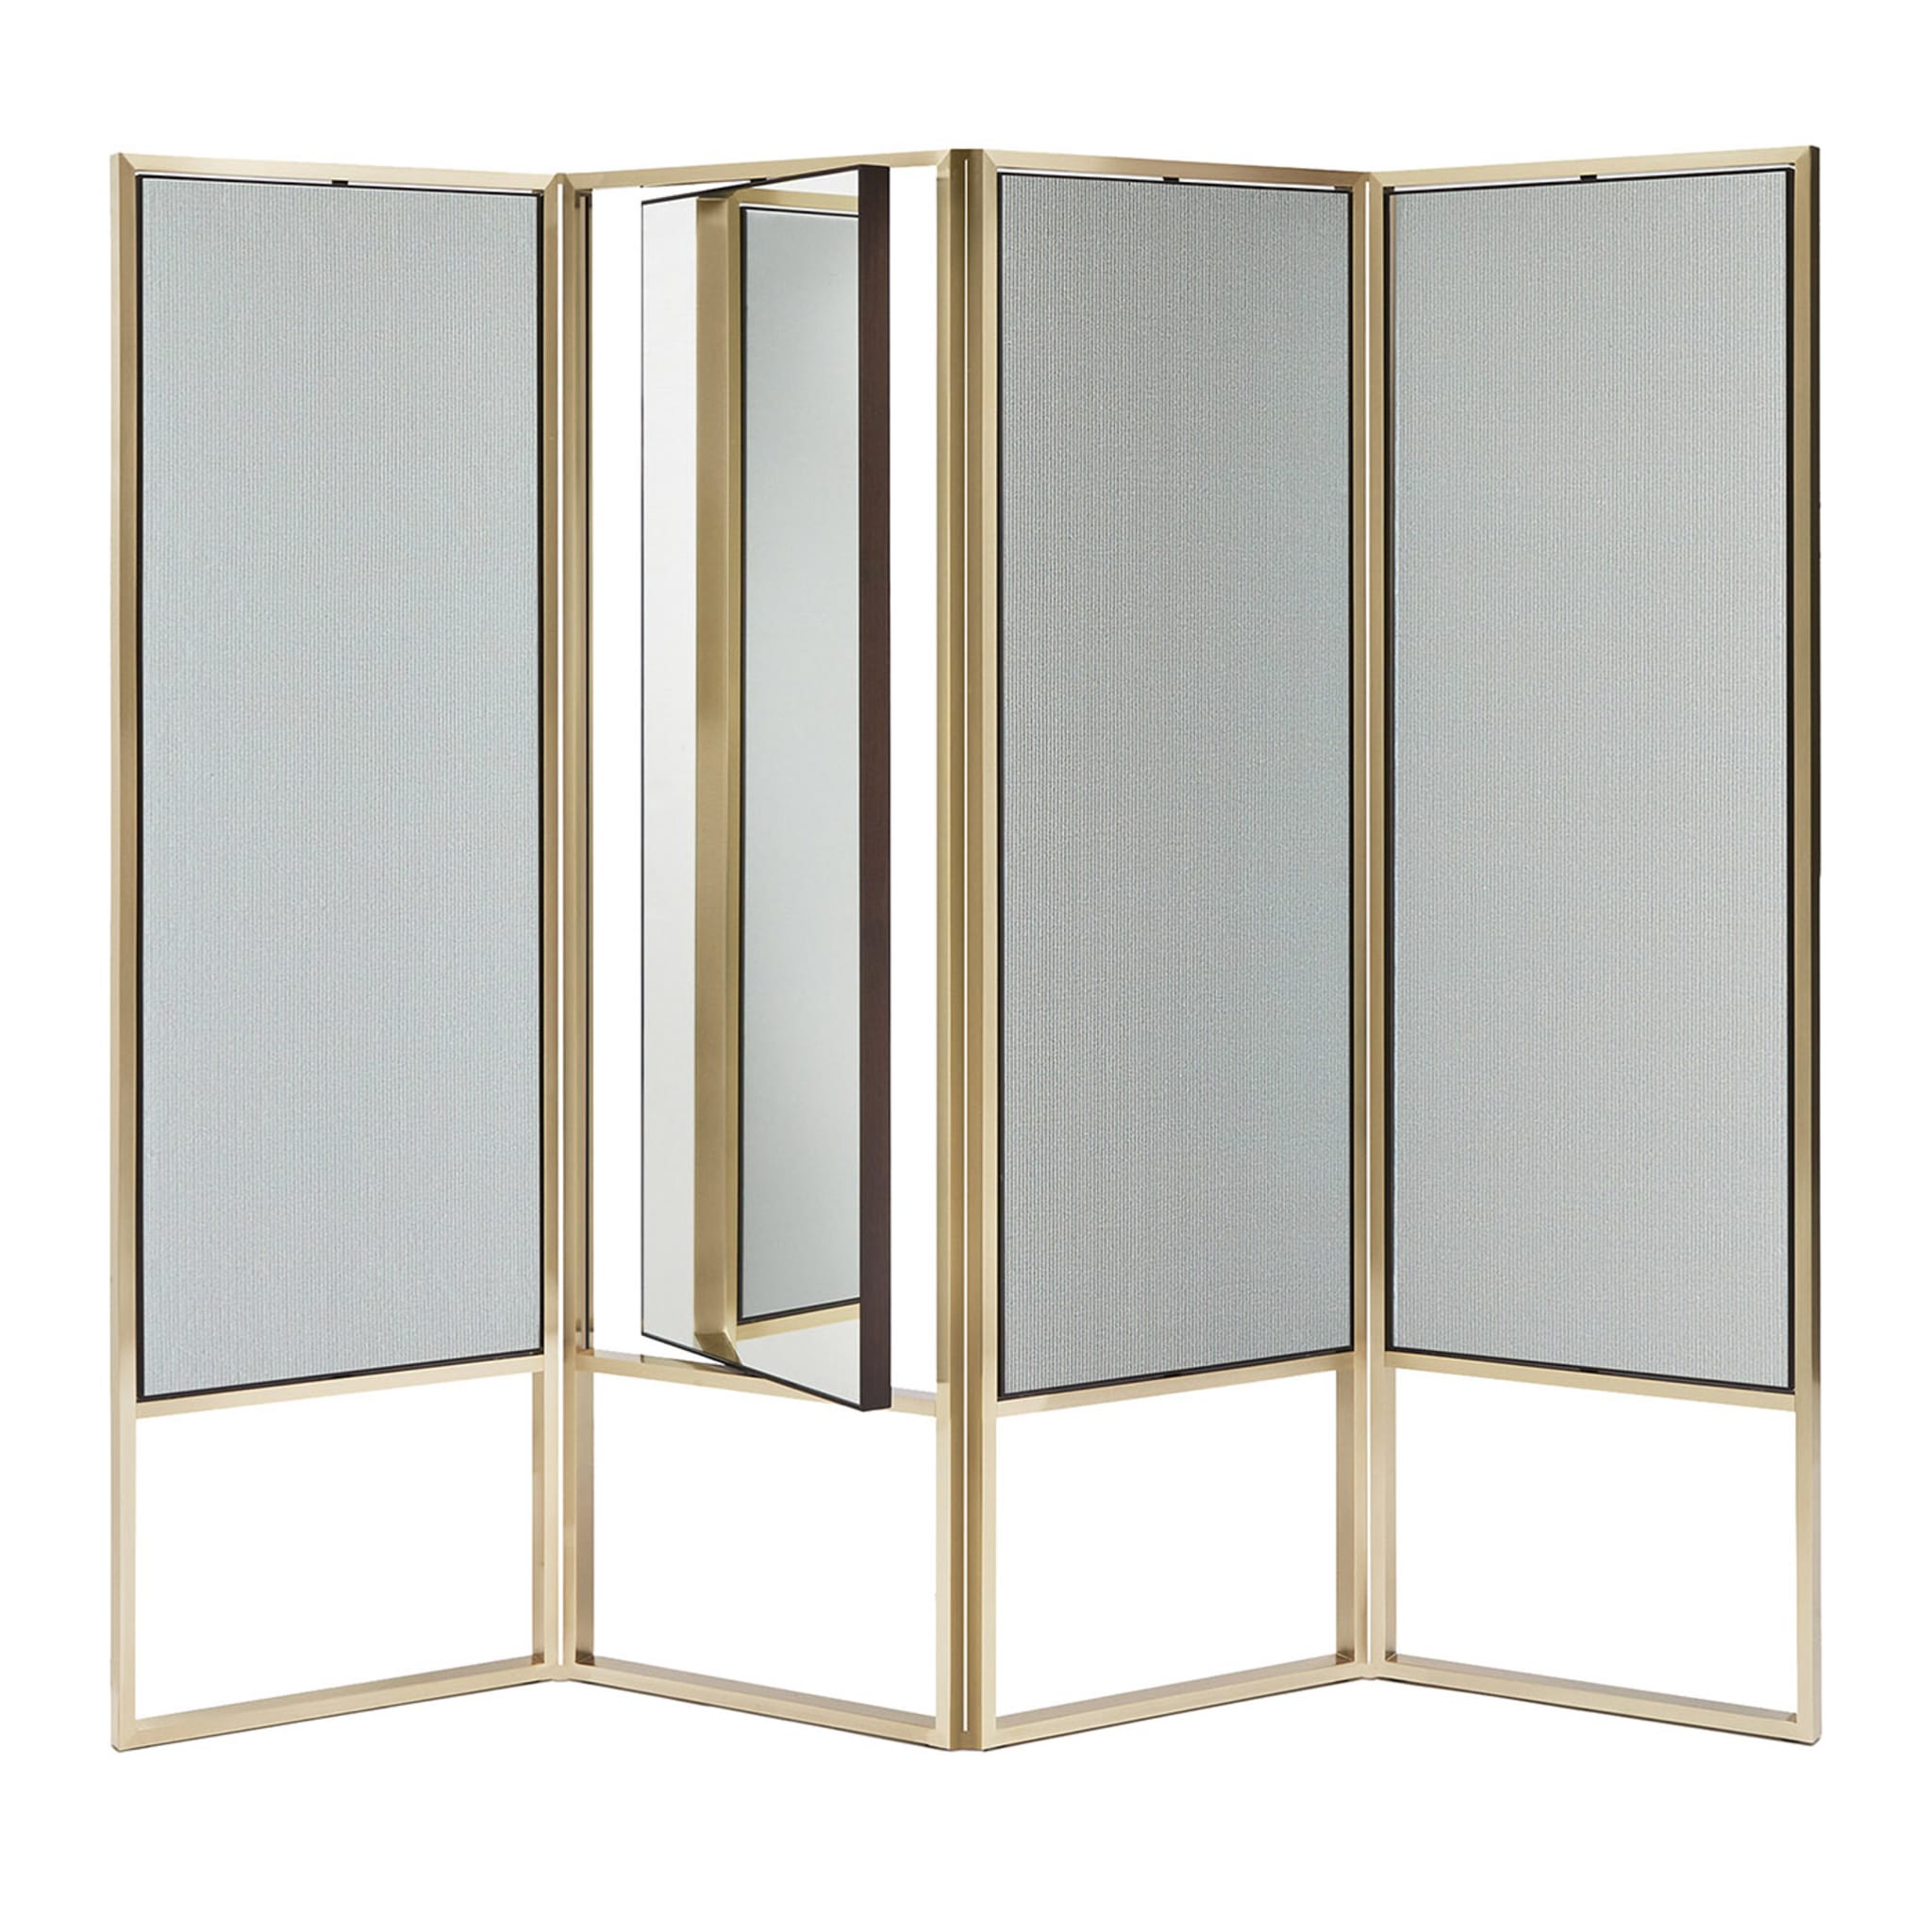 Ombra Room Divider with Mirrored side - Main view